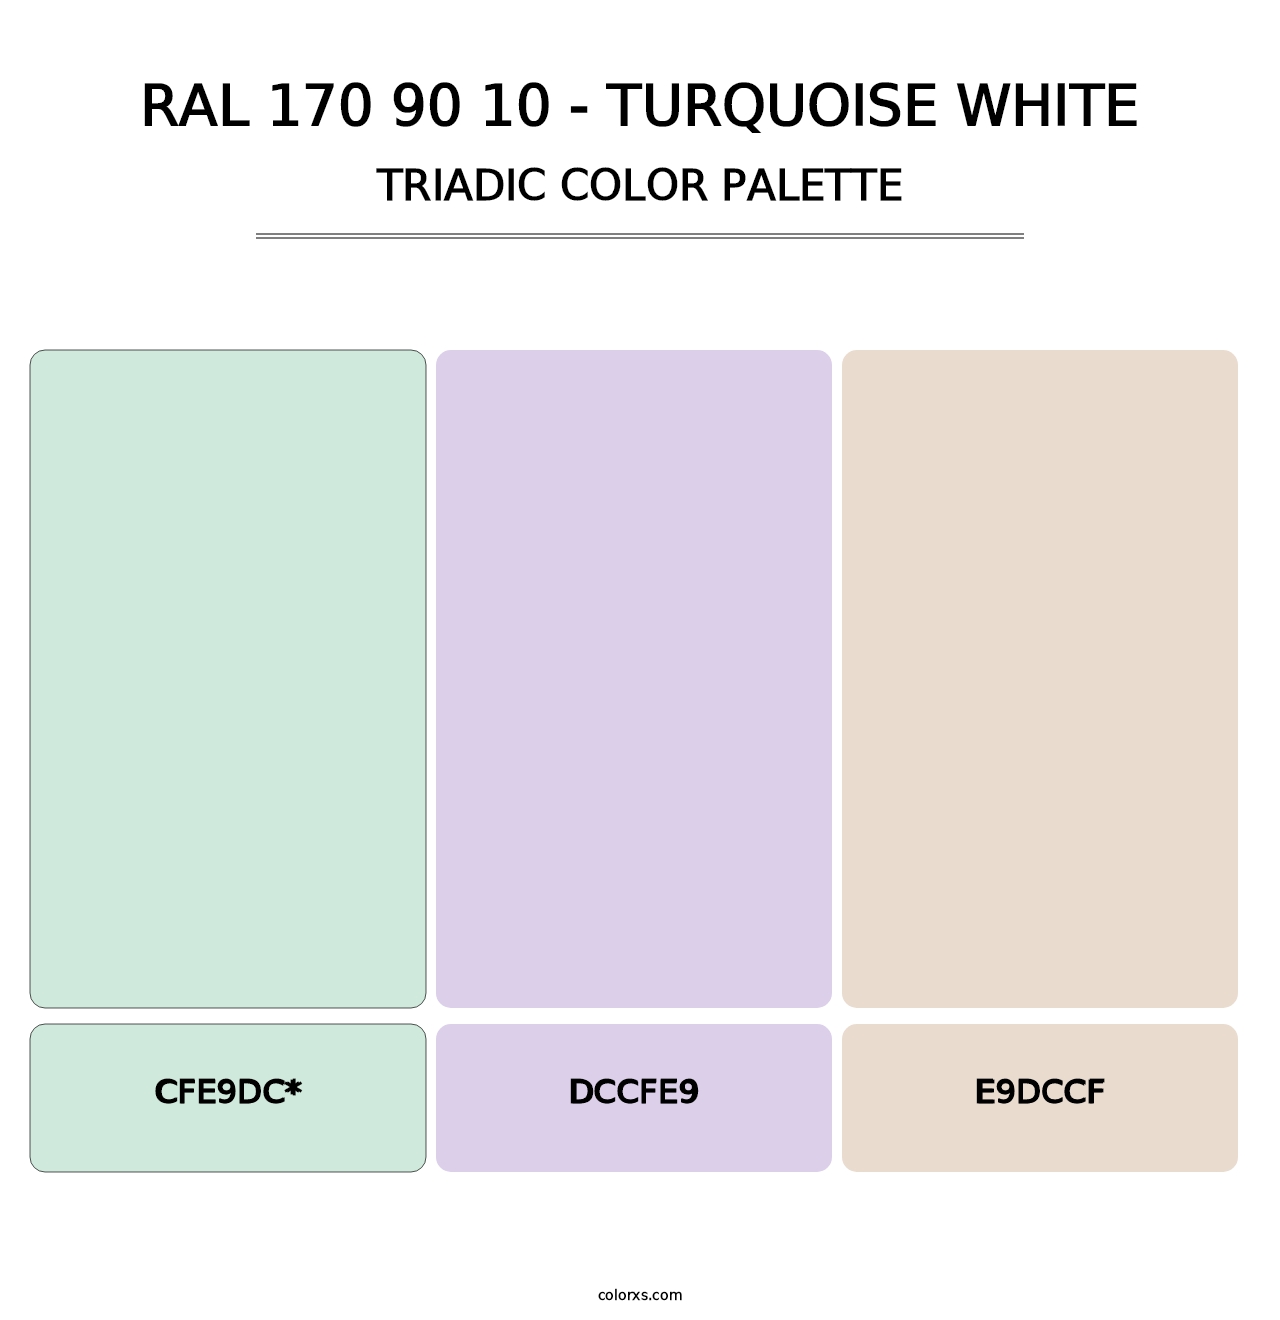 RAL 170 90 10 - Turquoise White - Triadic Color Palette